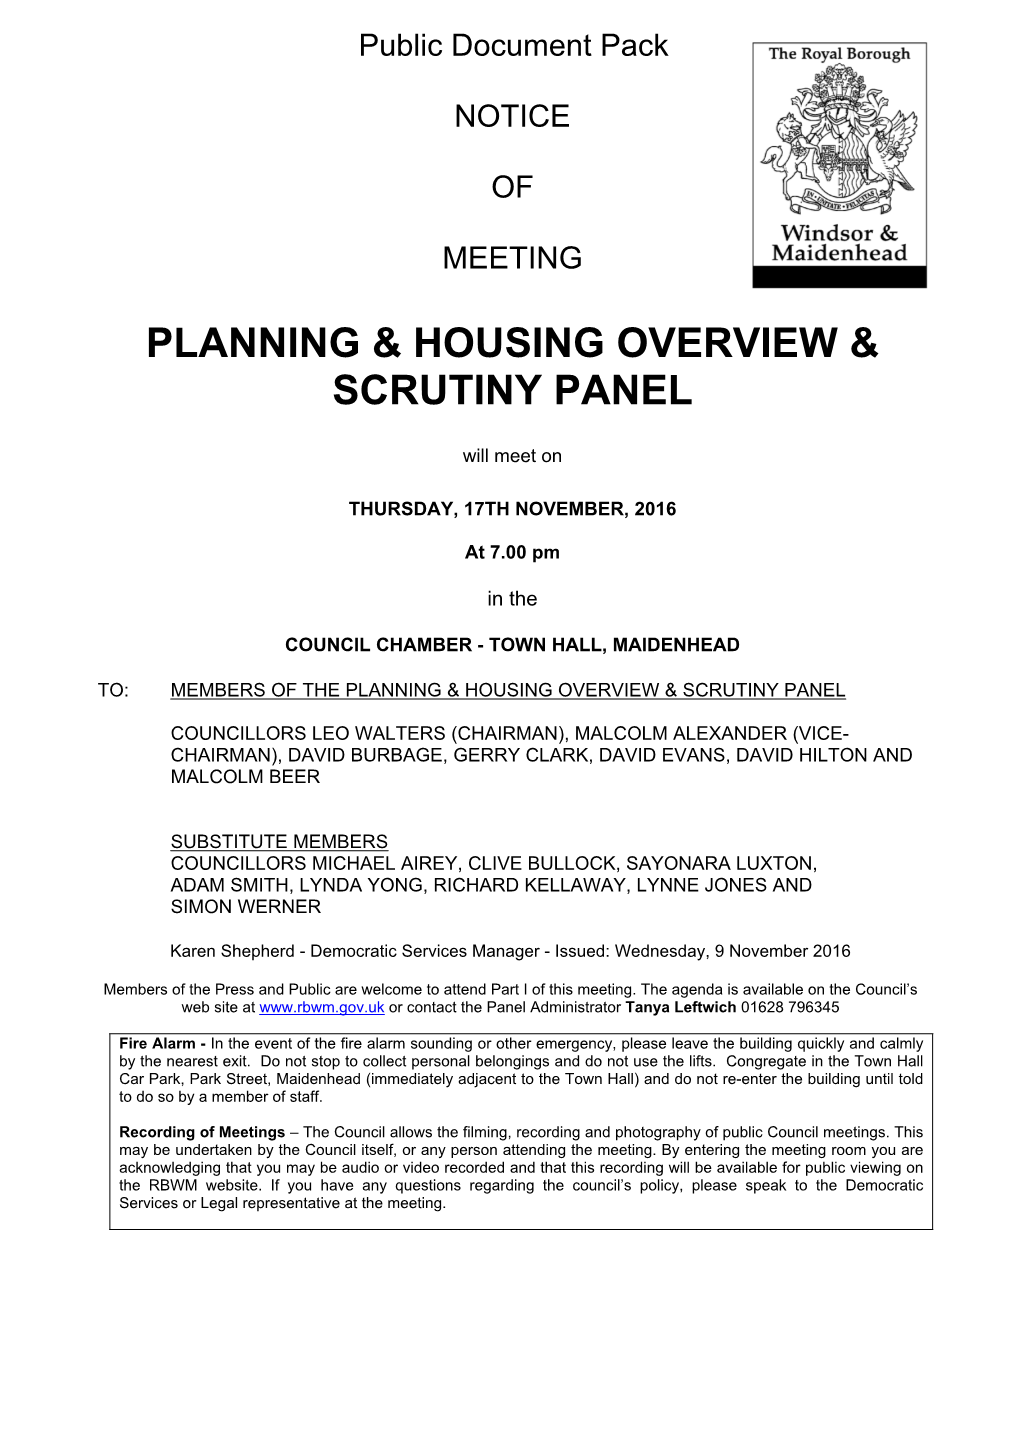 (Public Pack)Agenda Document for Planning & Housing Overview & Scrutiny Panel, 17/11/2016 19:00